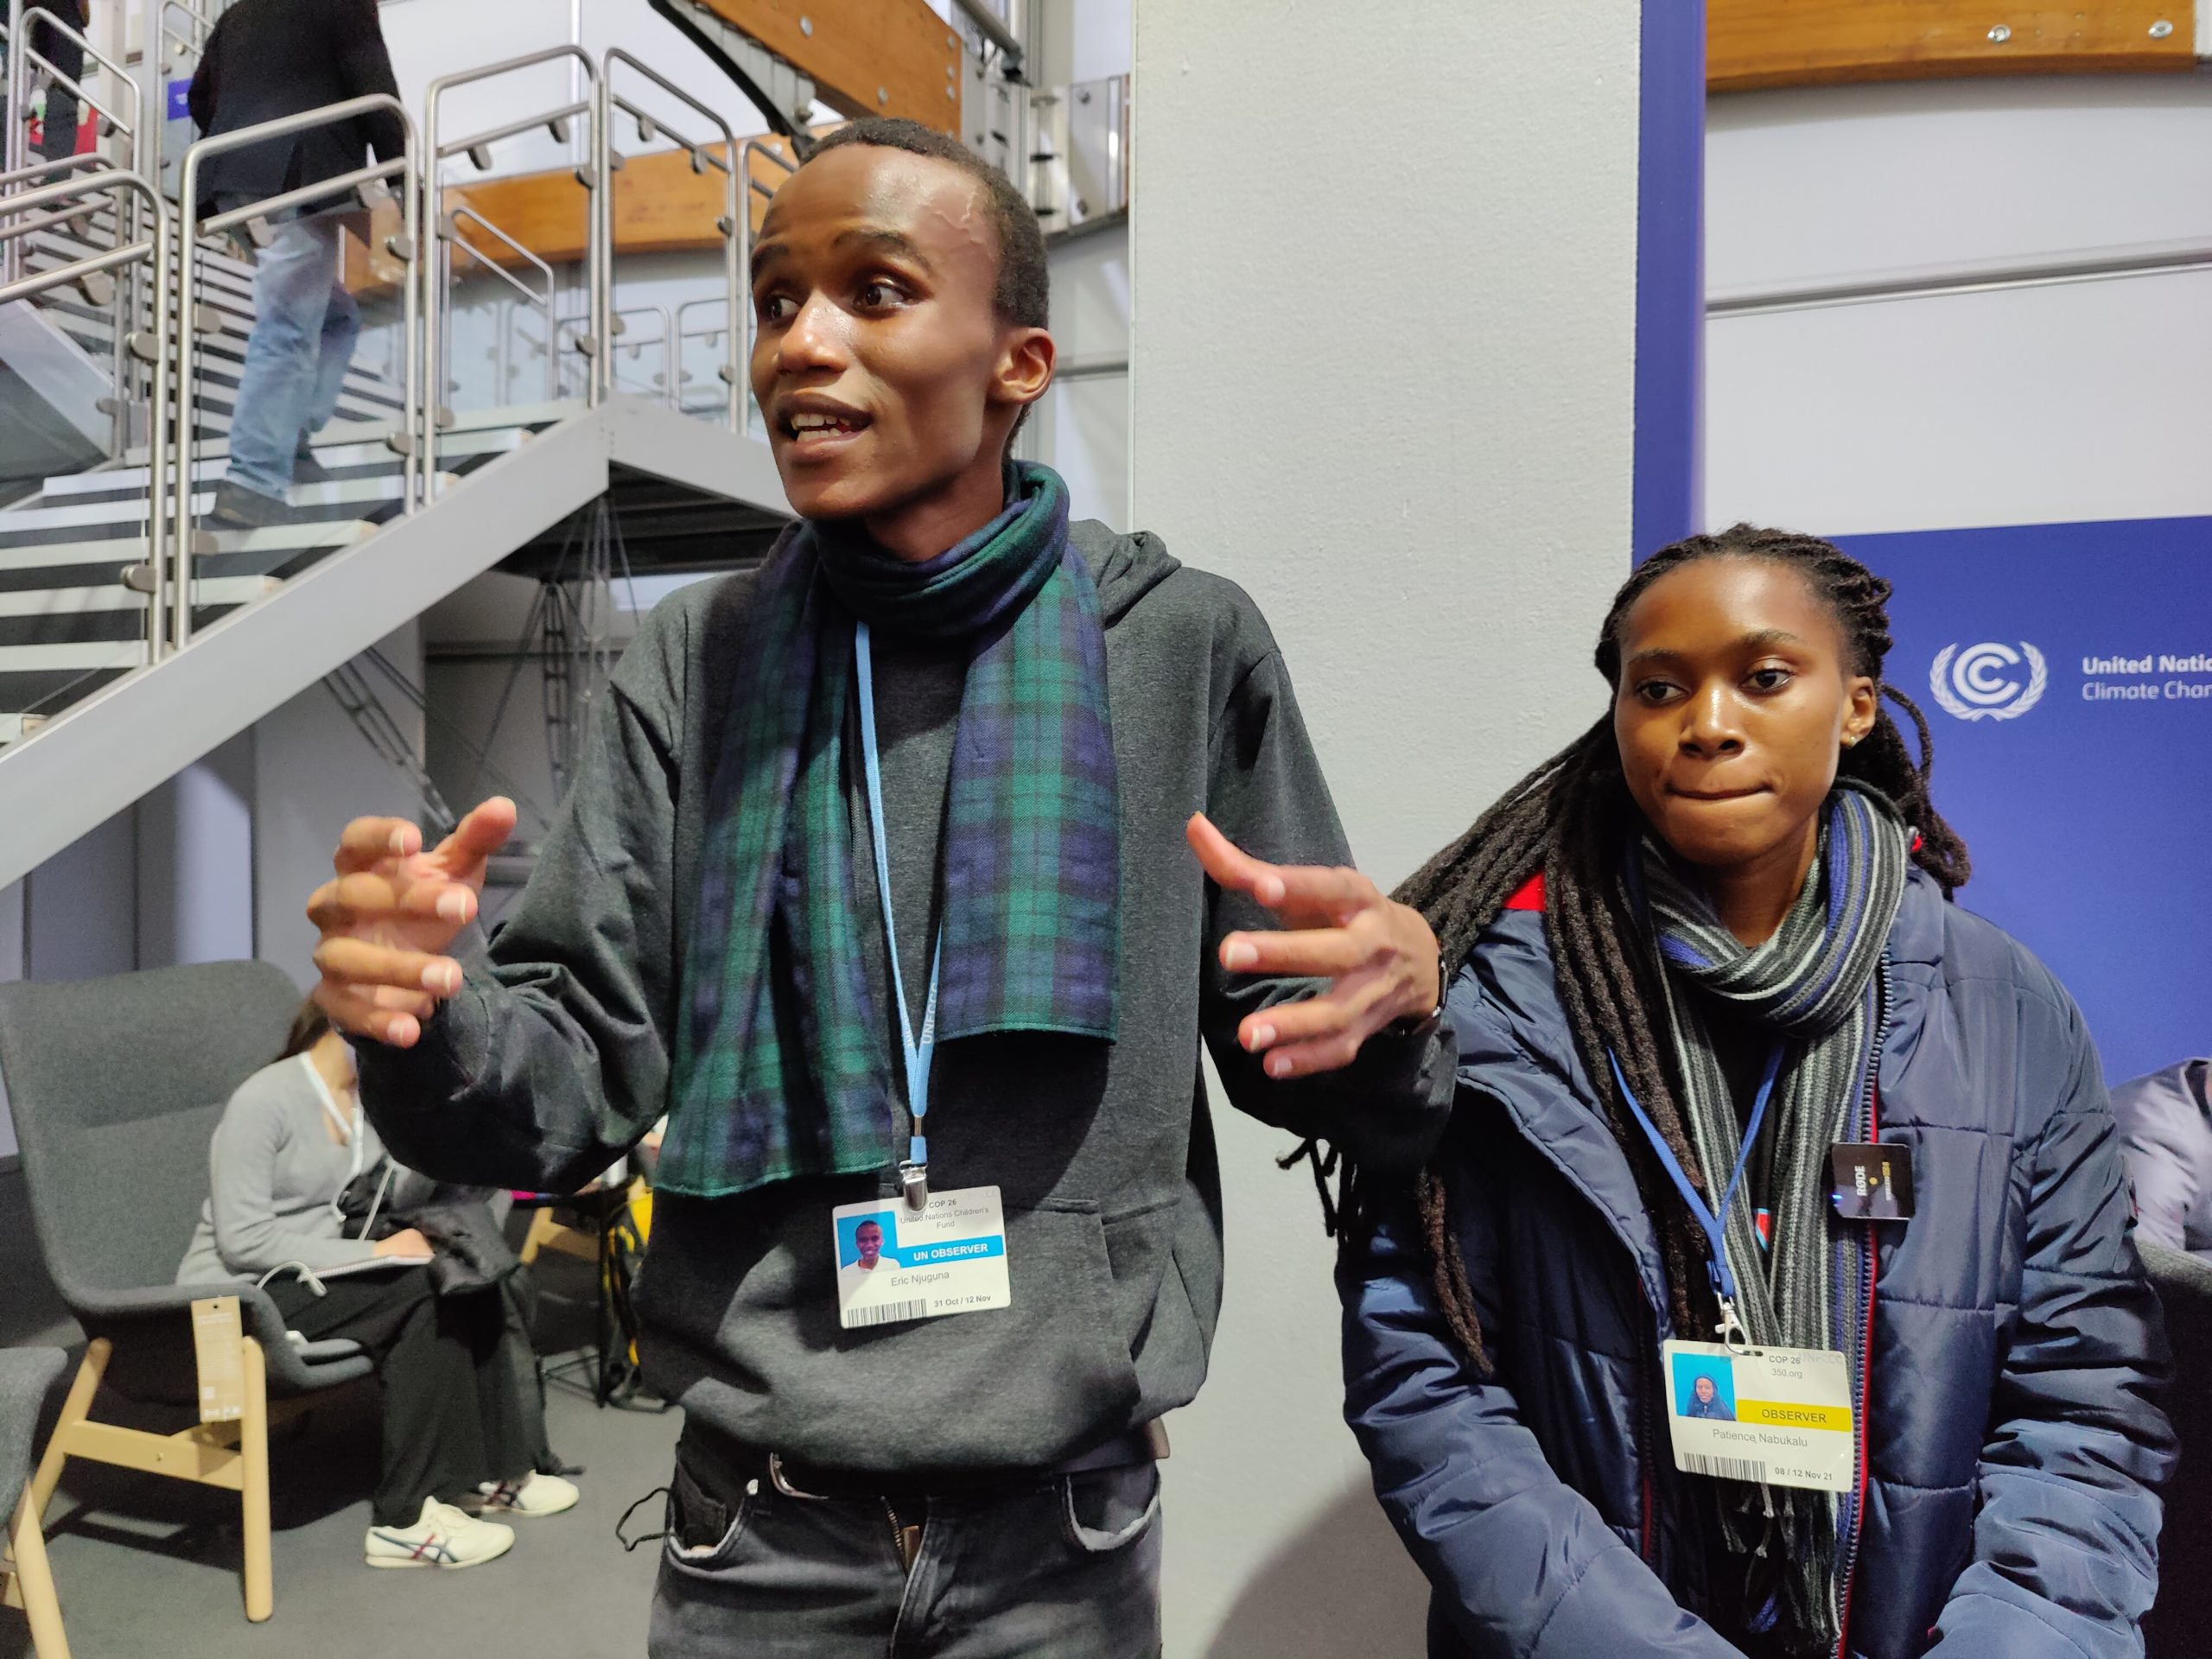 Youth at COP26. Eric Njuguna (left) from Kenya, Patience Nabukalu from Uganda said they were angry and disappointed at how COP26 panned out. (Image: Disha Shetty)